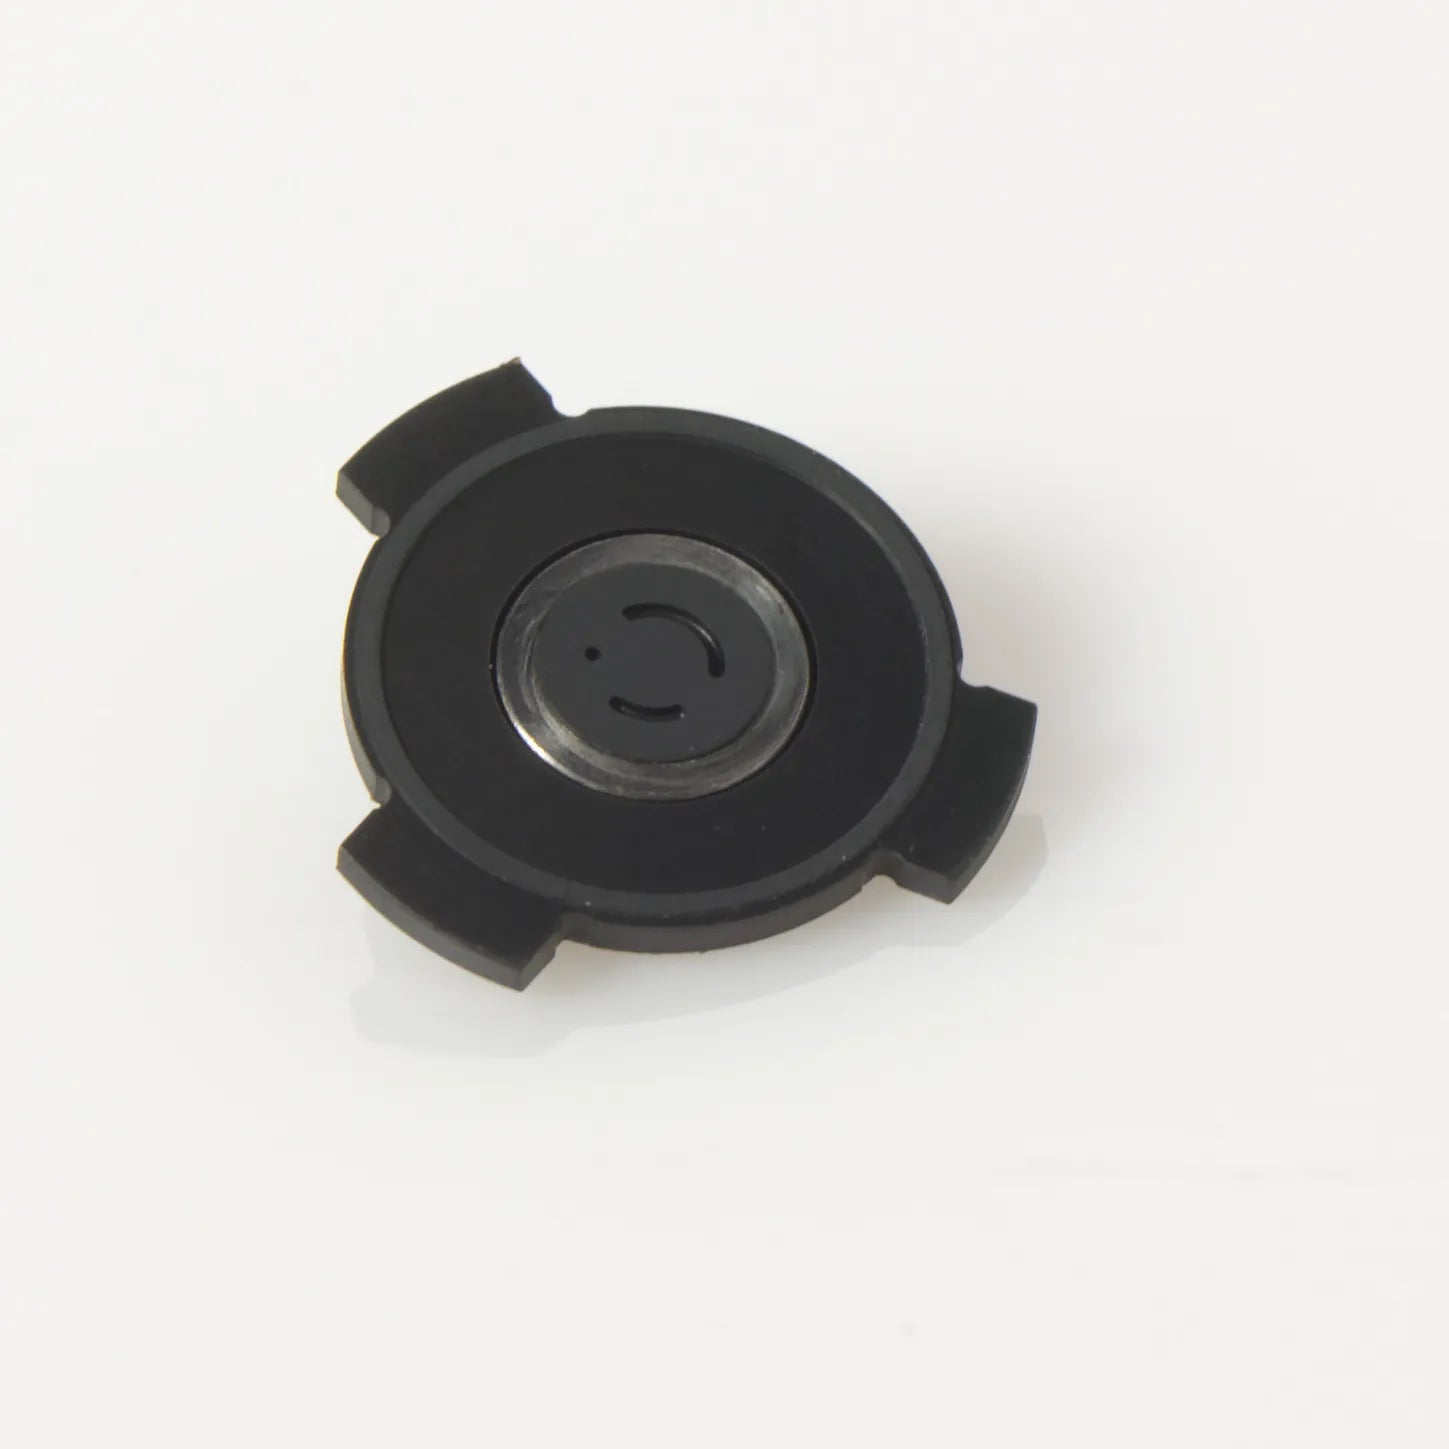 Rotor Seal, 6 port, -COH, Comparable to Vici®/Valco® # C2-10R6-COH